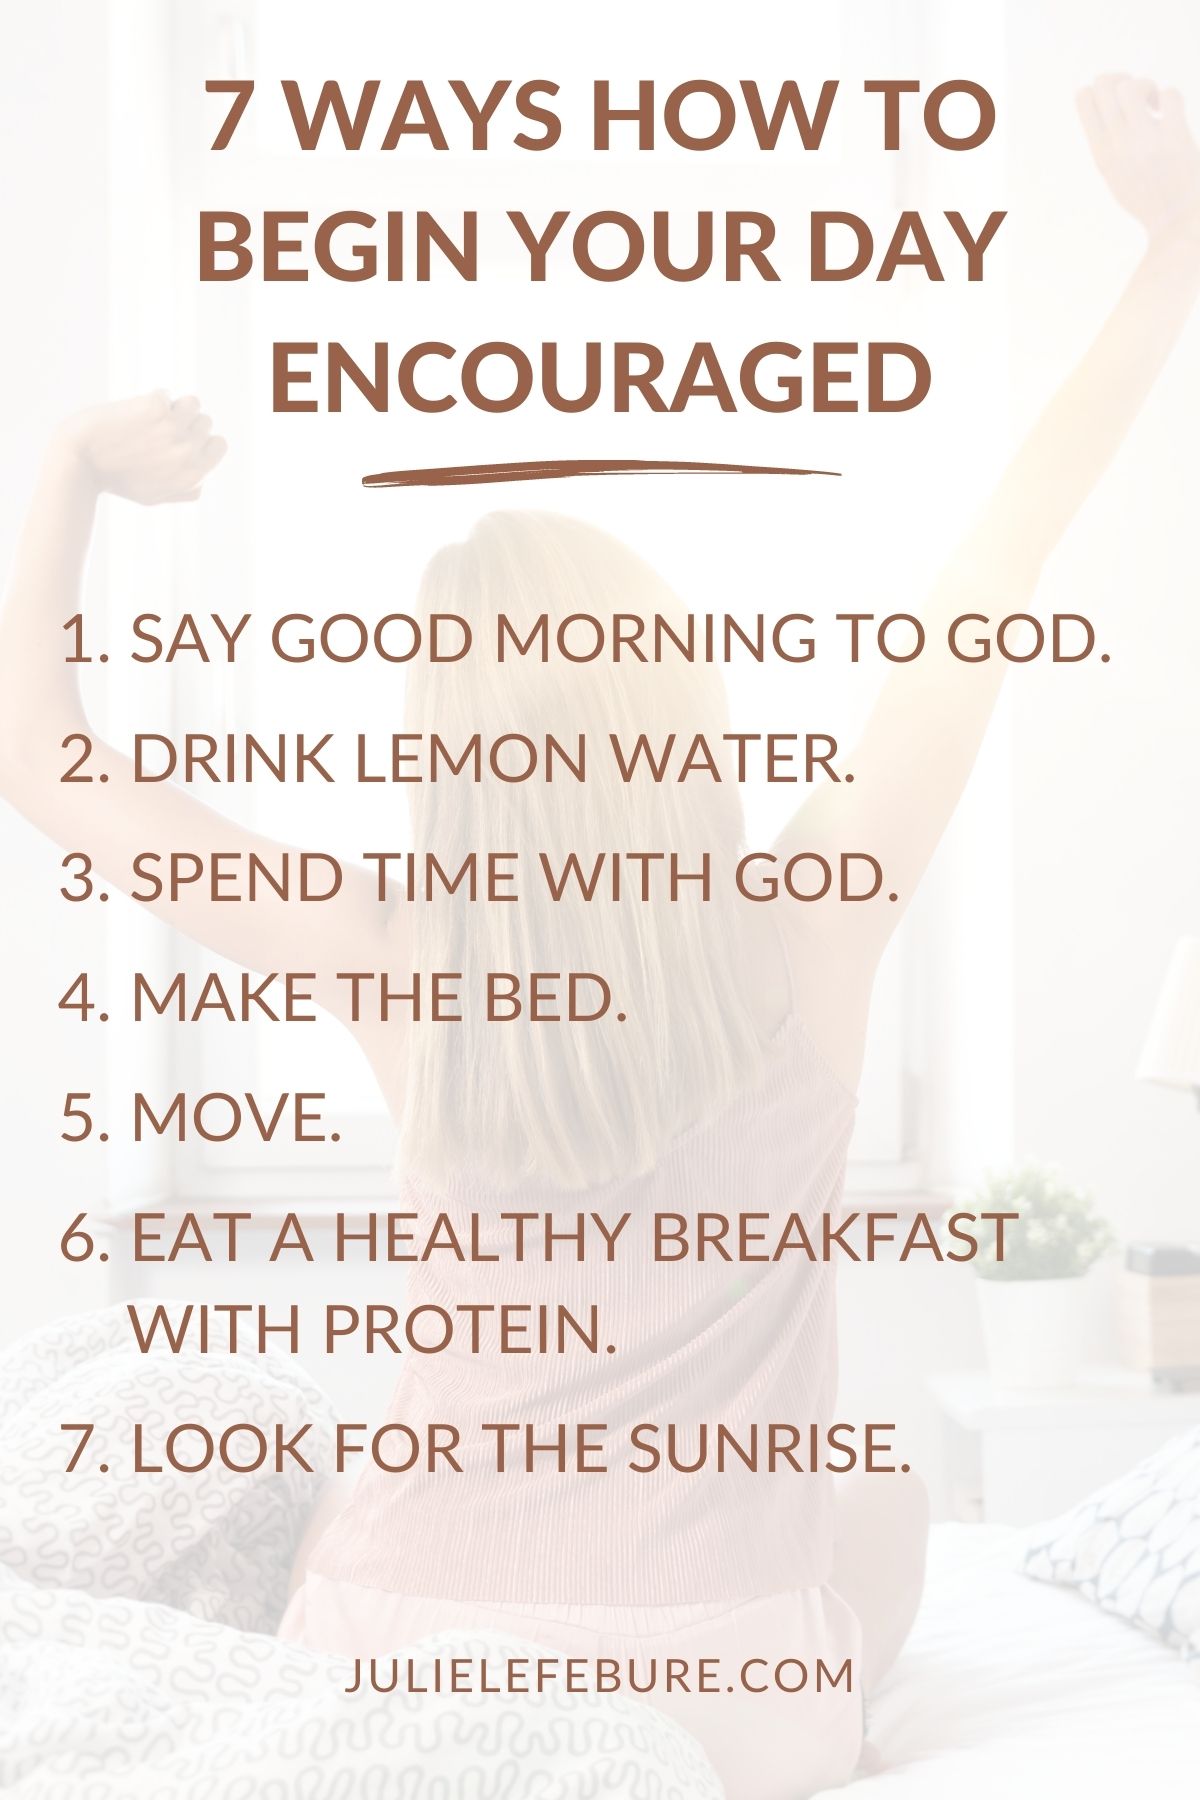 7 Ways to Begin Your Day Encouraged